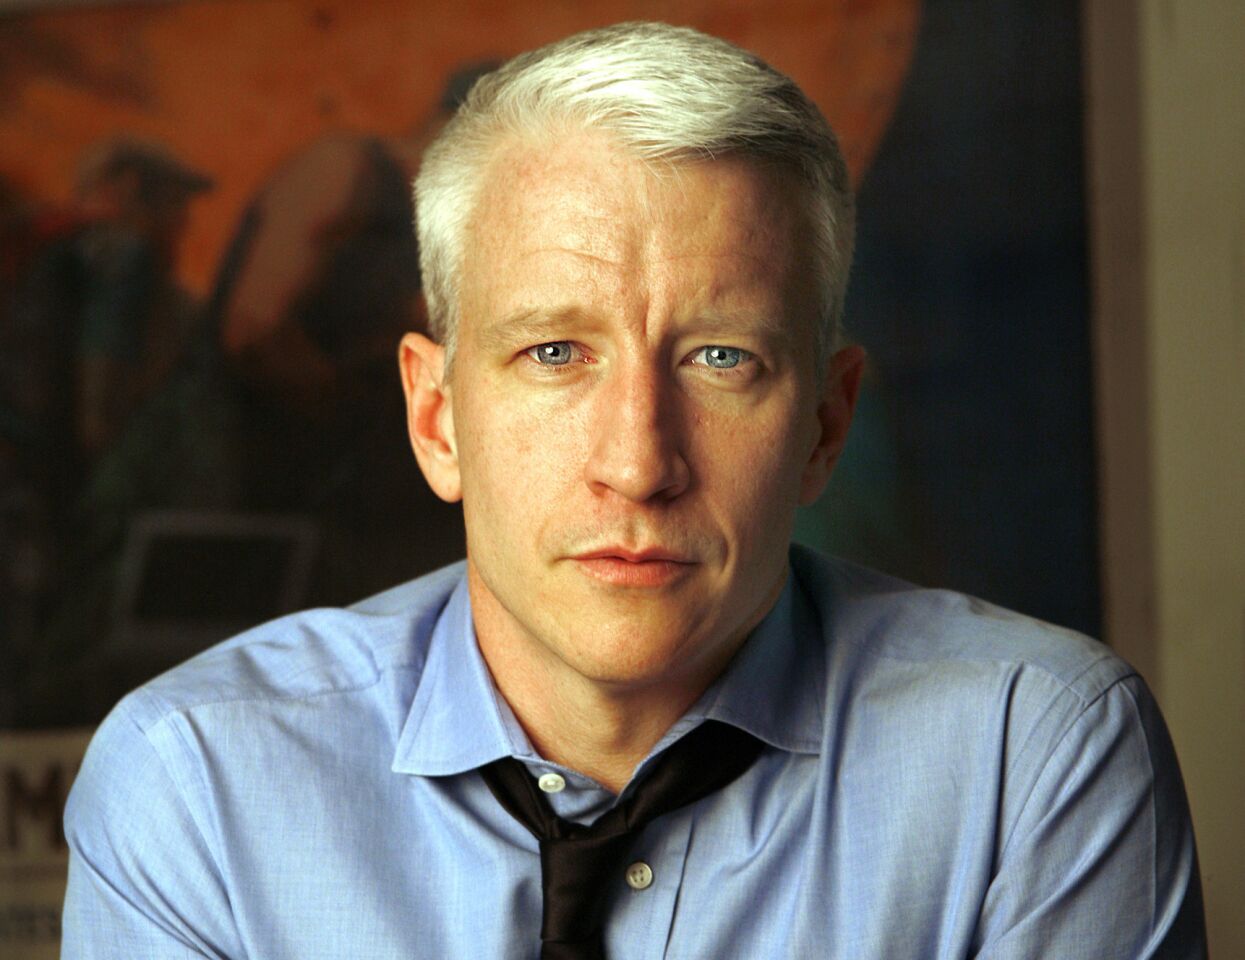 Until July, Anderson Cooper had never publicly confirmed he was gay, but he'd never denied it, either. Cooper's sexual orientation has long been an open secret, but it took an Entertainment Weekly cover story about gay celebrities to prompt the newsman to finally come out.